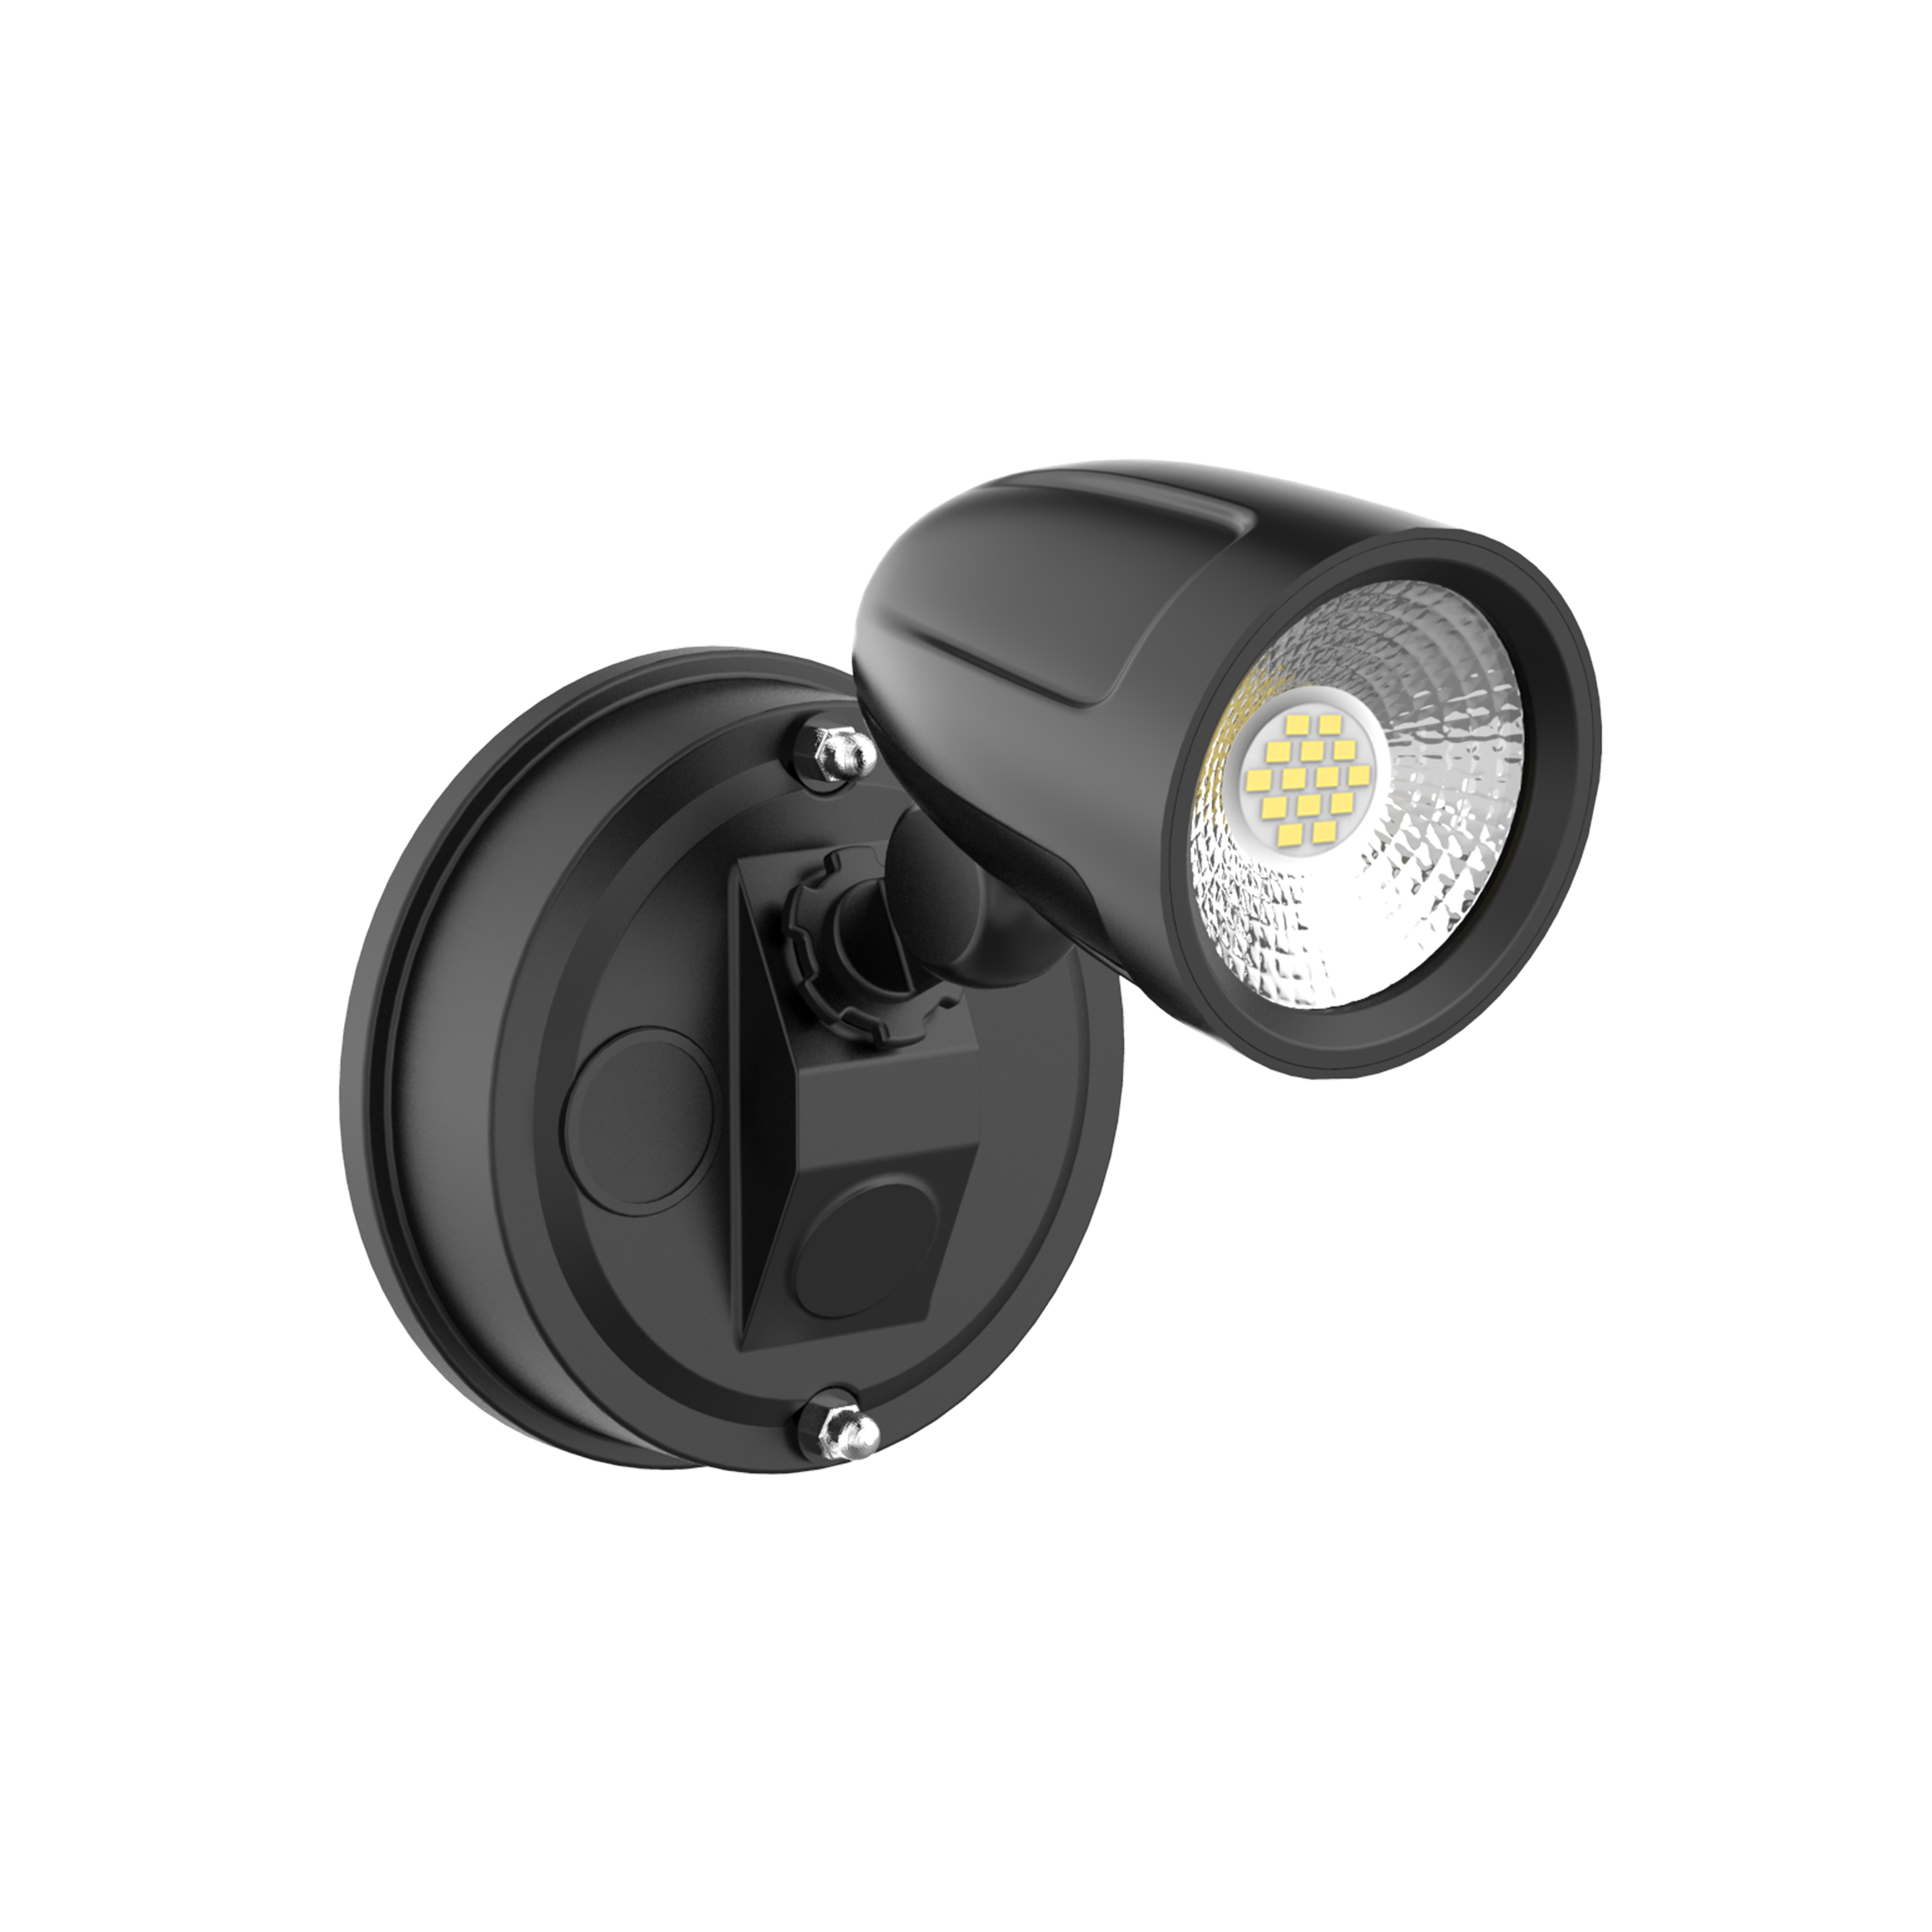 10W YB2R-010 LED Security Light With IP54 Rated